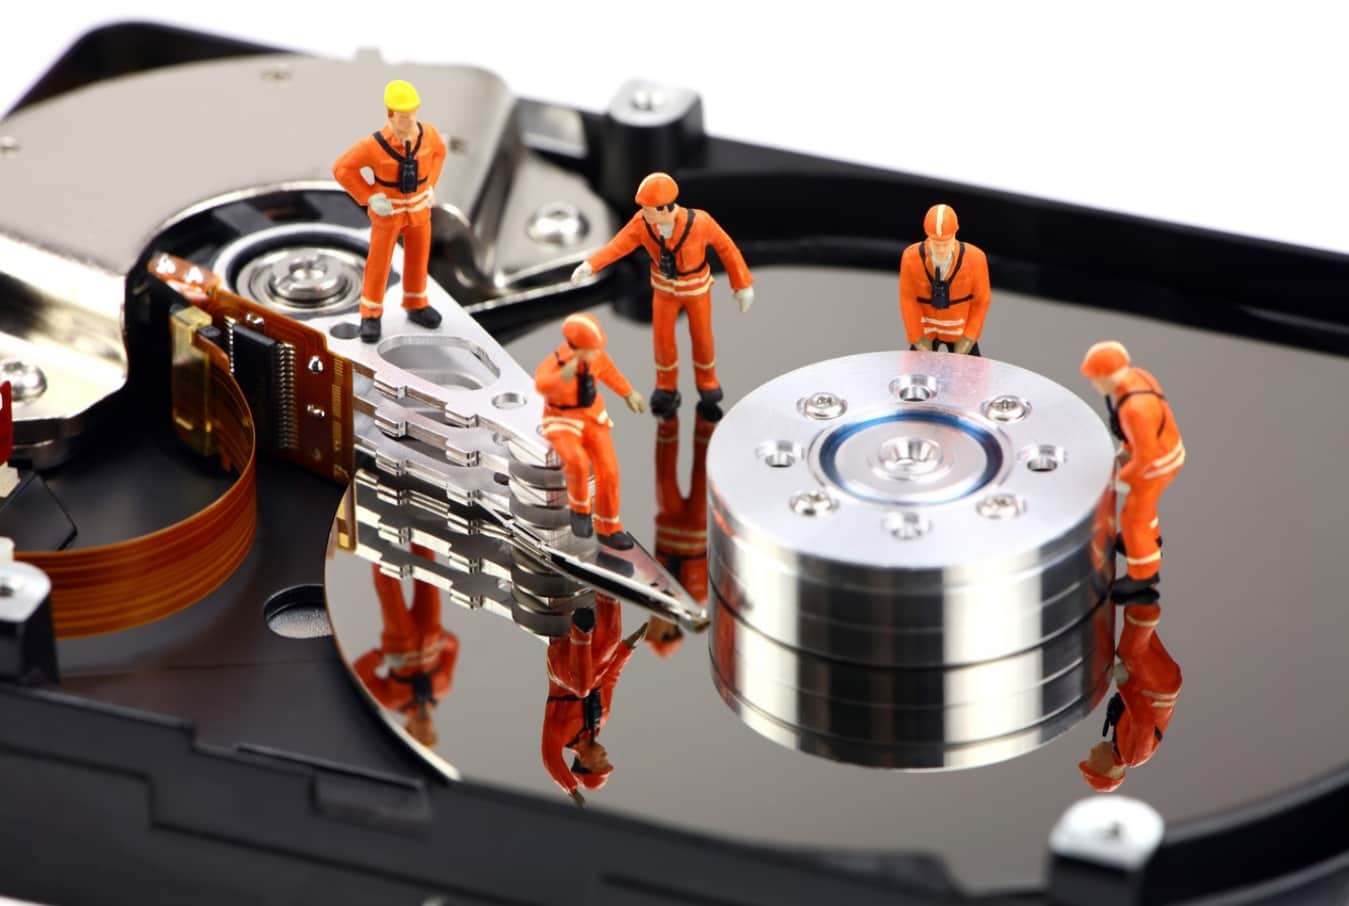 All You Need To Know For External Hard Drive Recovery